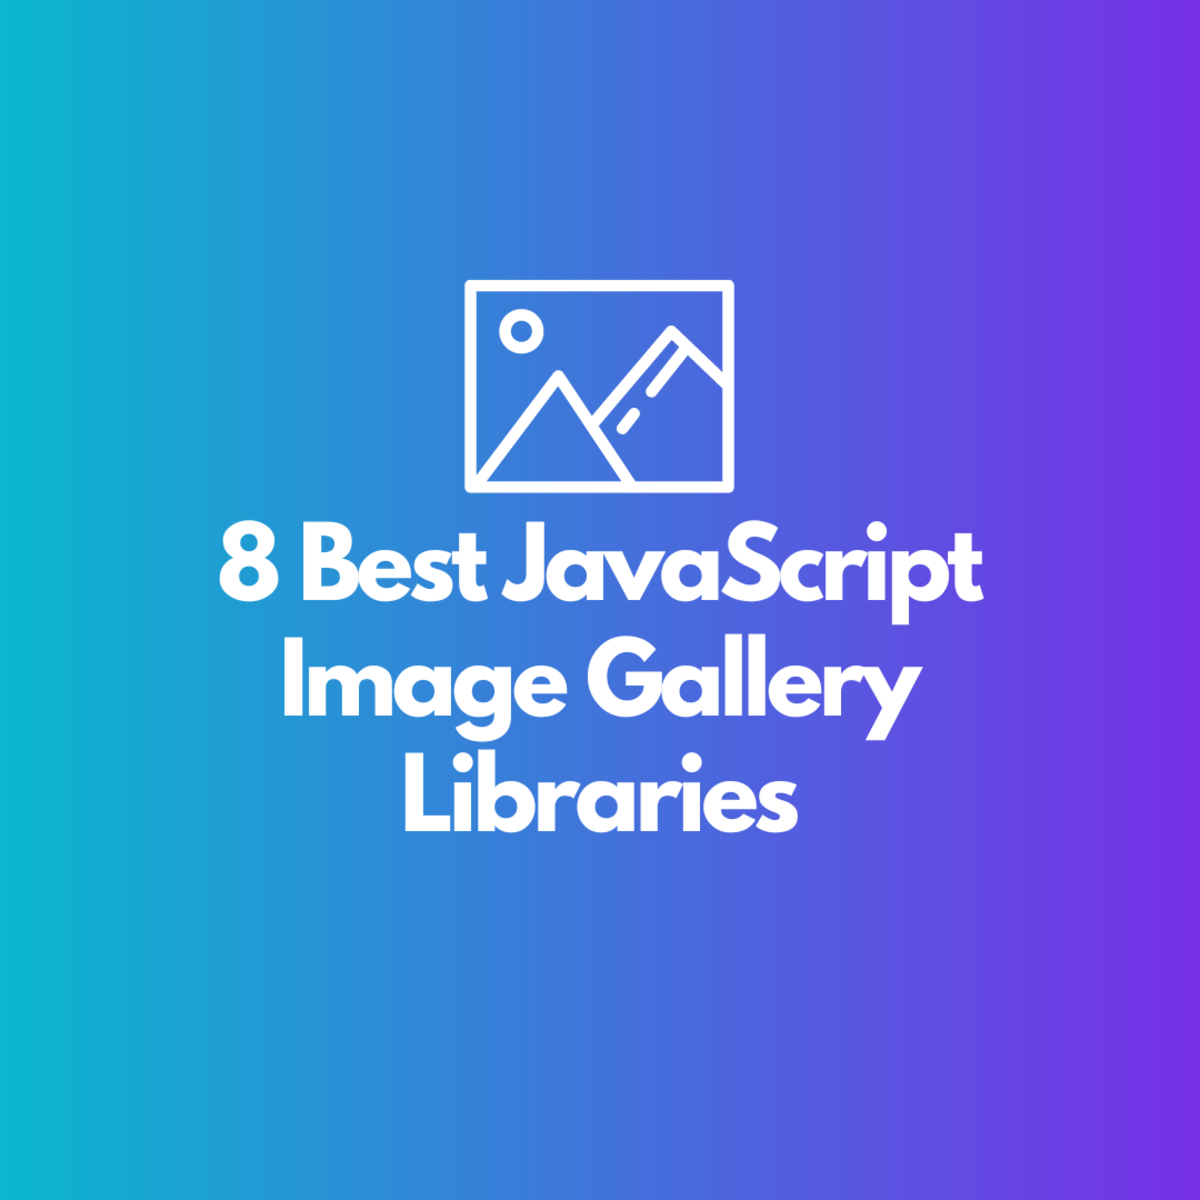 8 Best JavaScript Image Gallery Libraries to Check Out